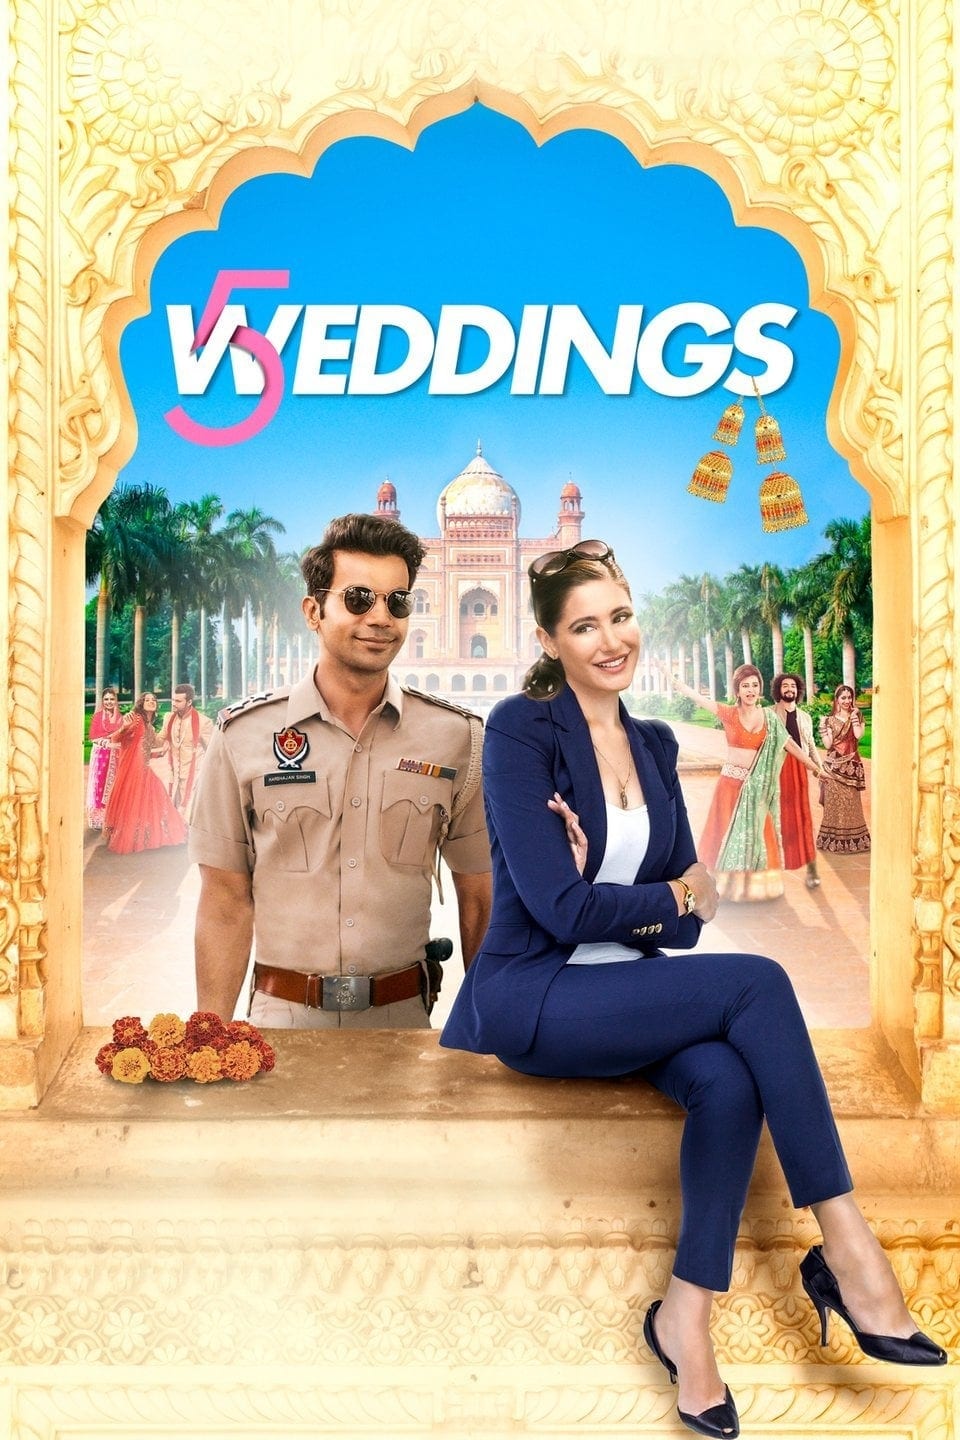 Poster for the movie "5 Weddings"